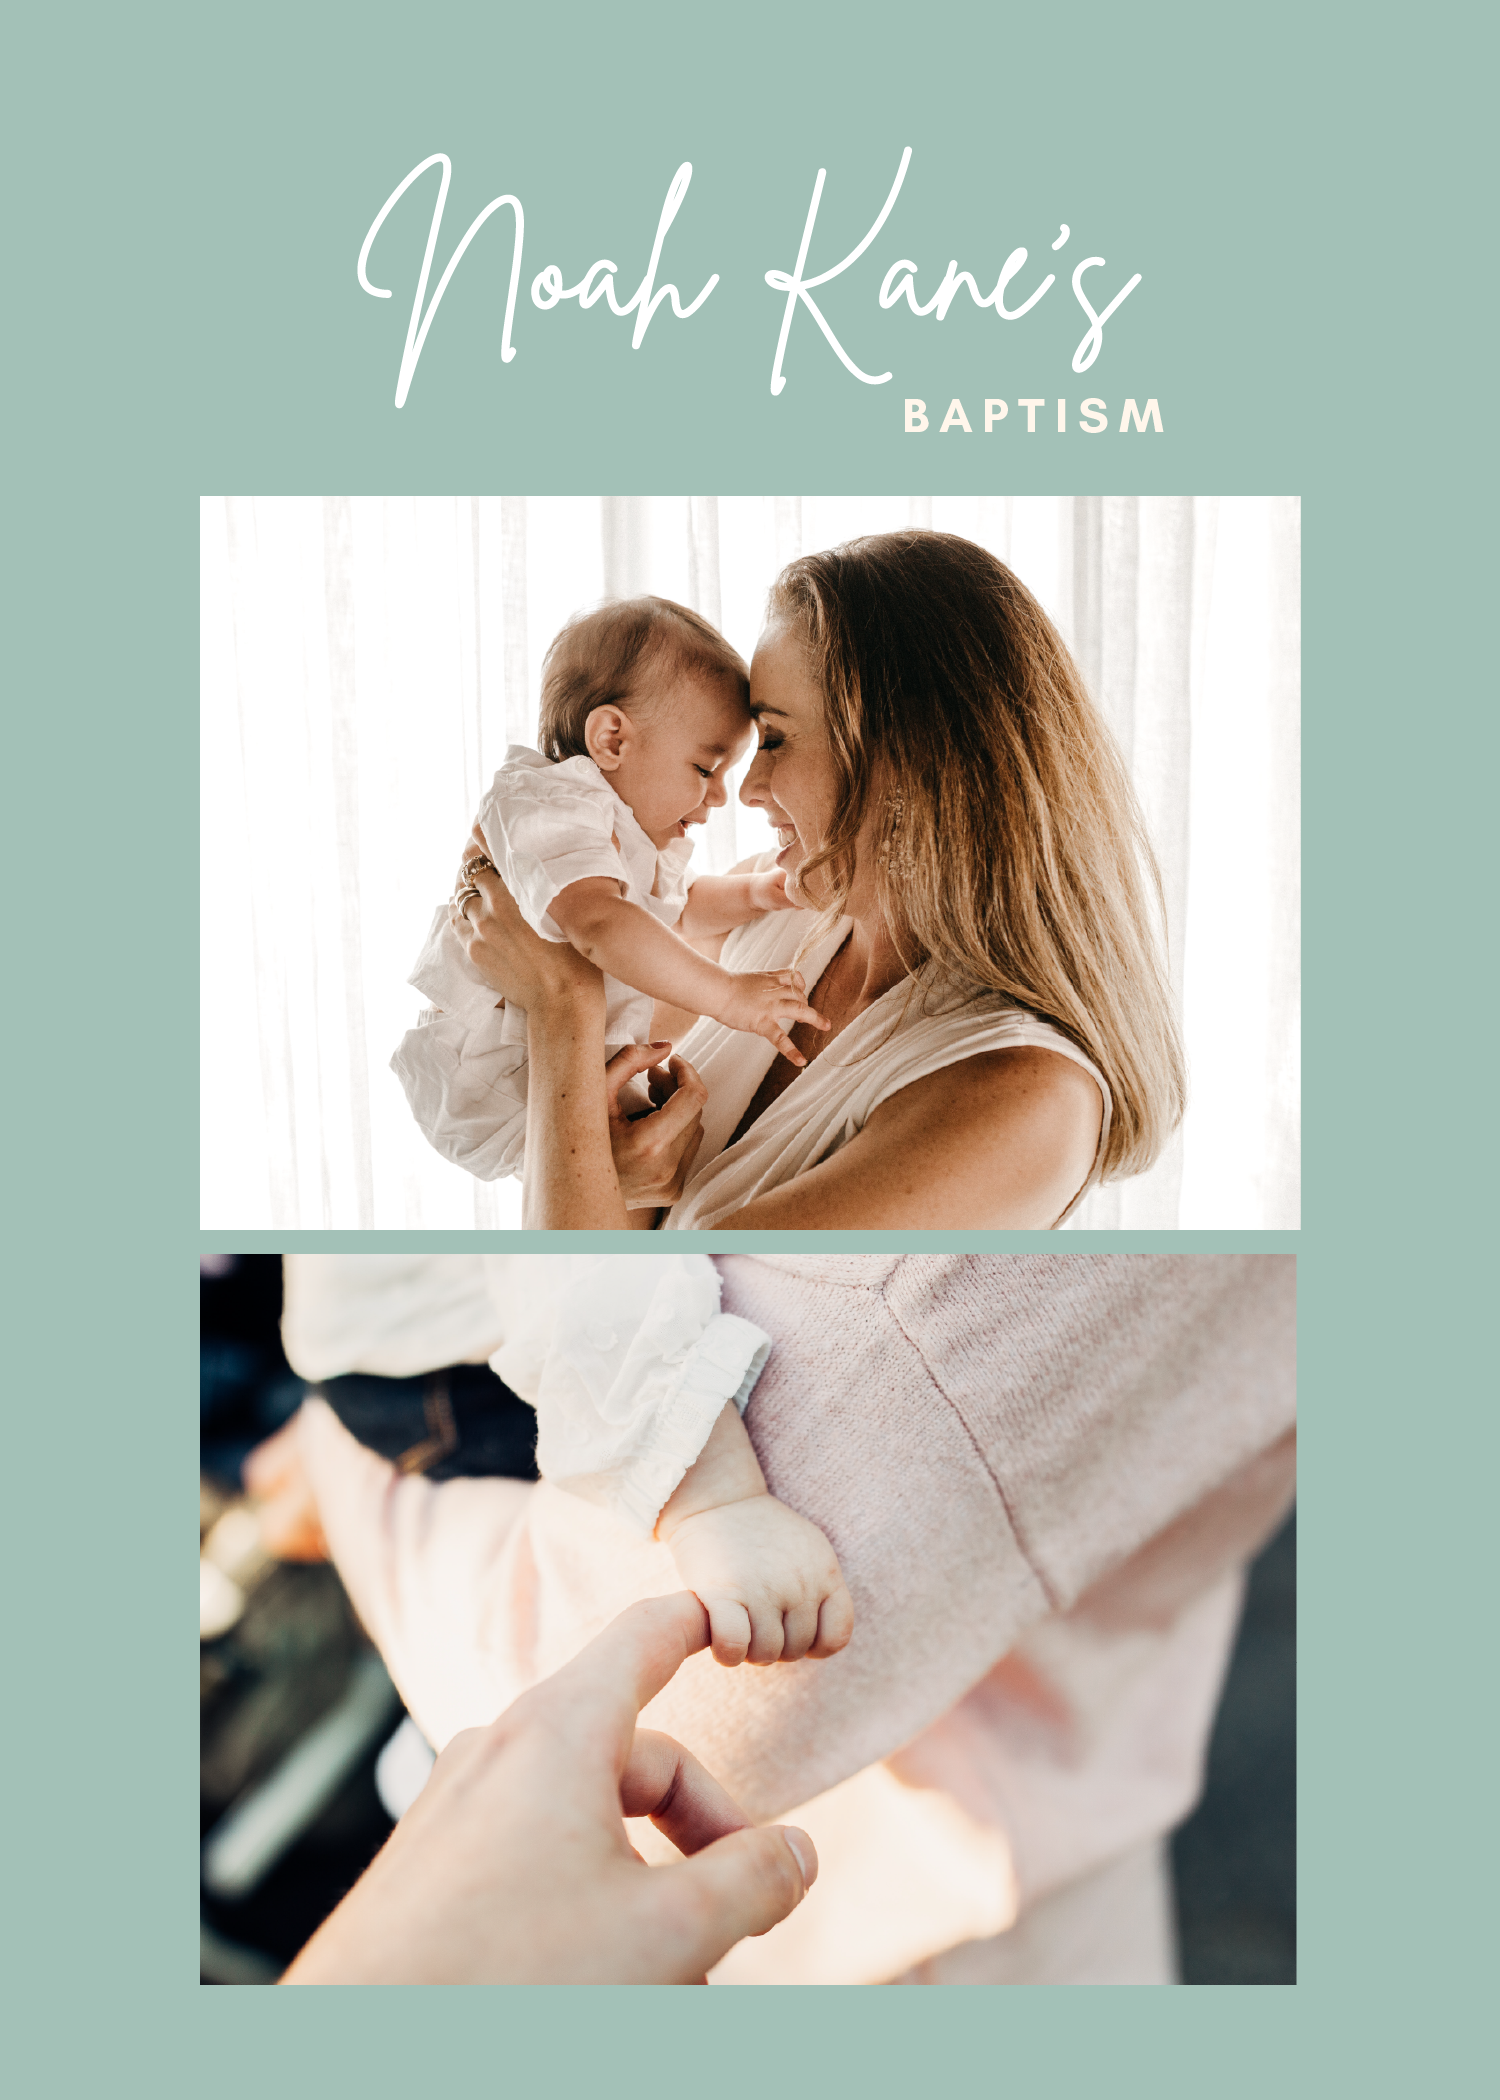 Baptism Photo Booth Template in Word, PDF, PSD